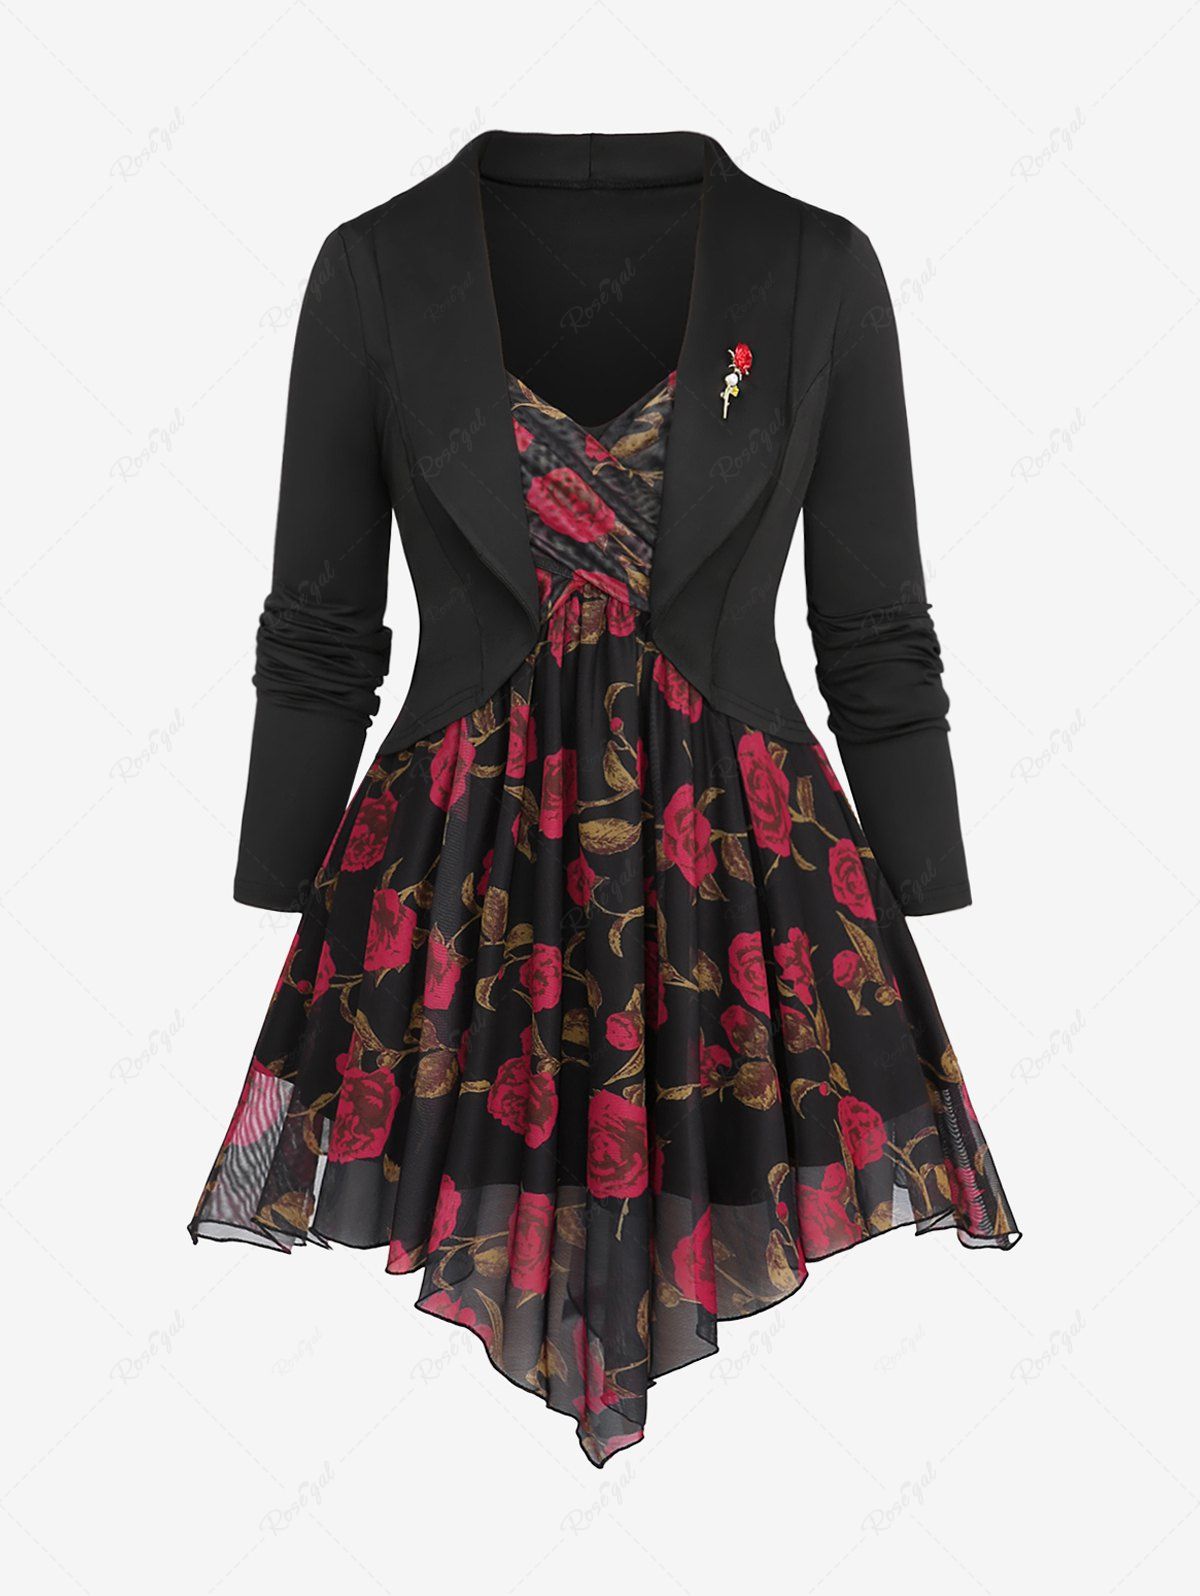 Discount Plus Size Flowers Print Surplice Asymmetric Mesh Lapel Collar 2 In 1 Top With Rose Brooch  